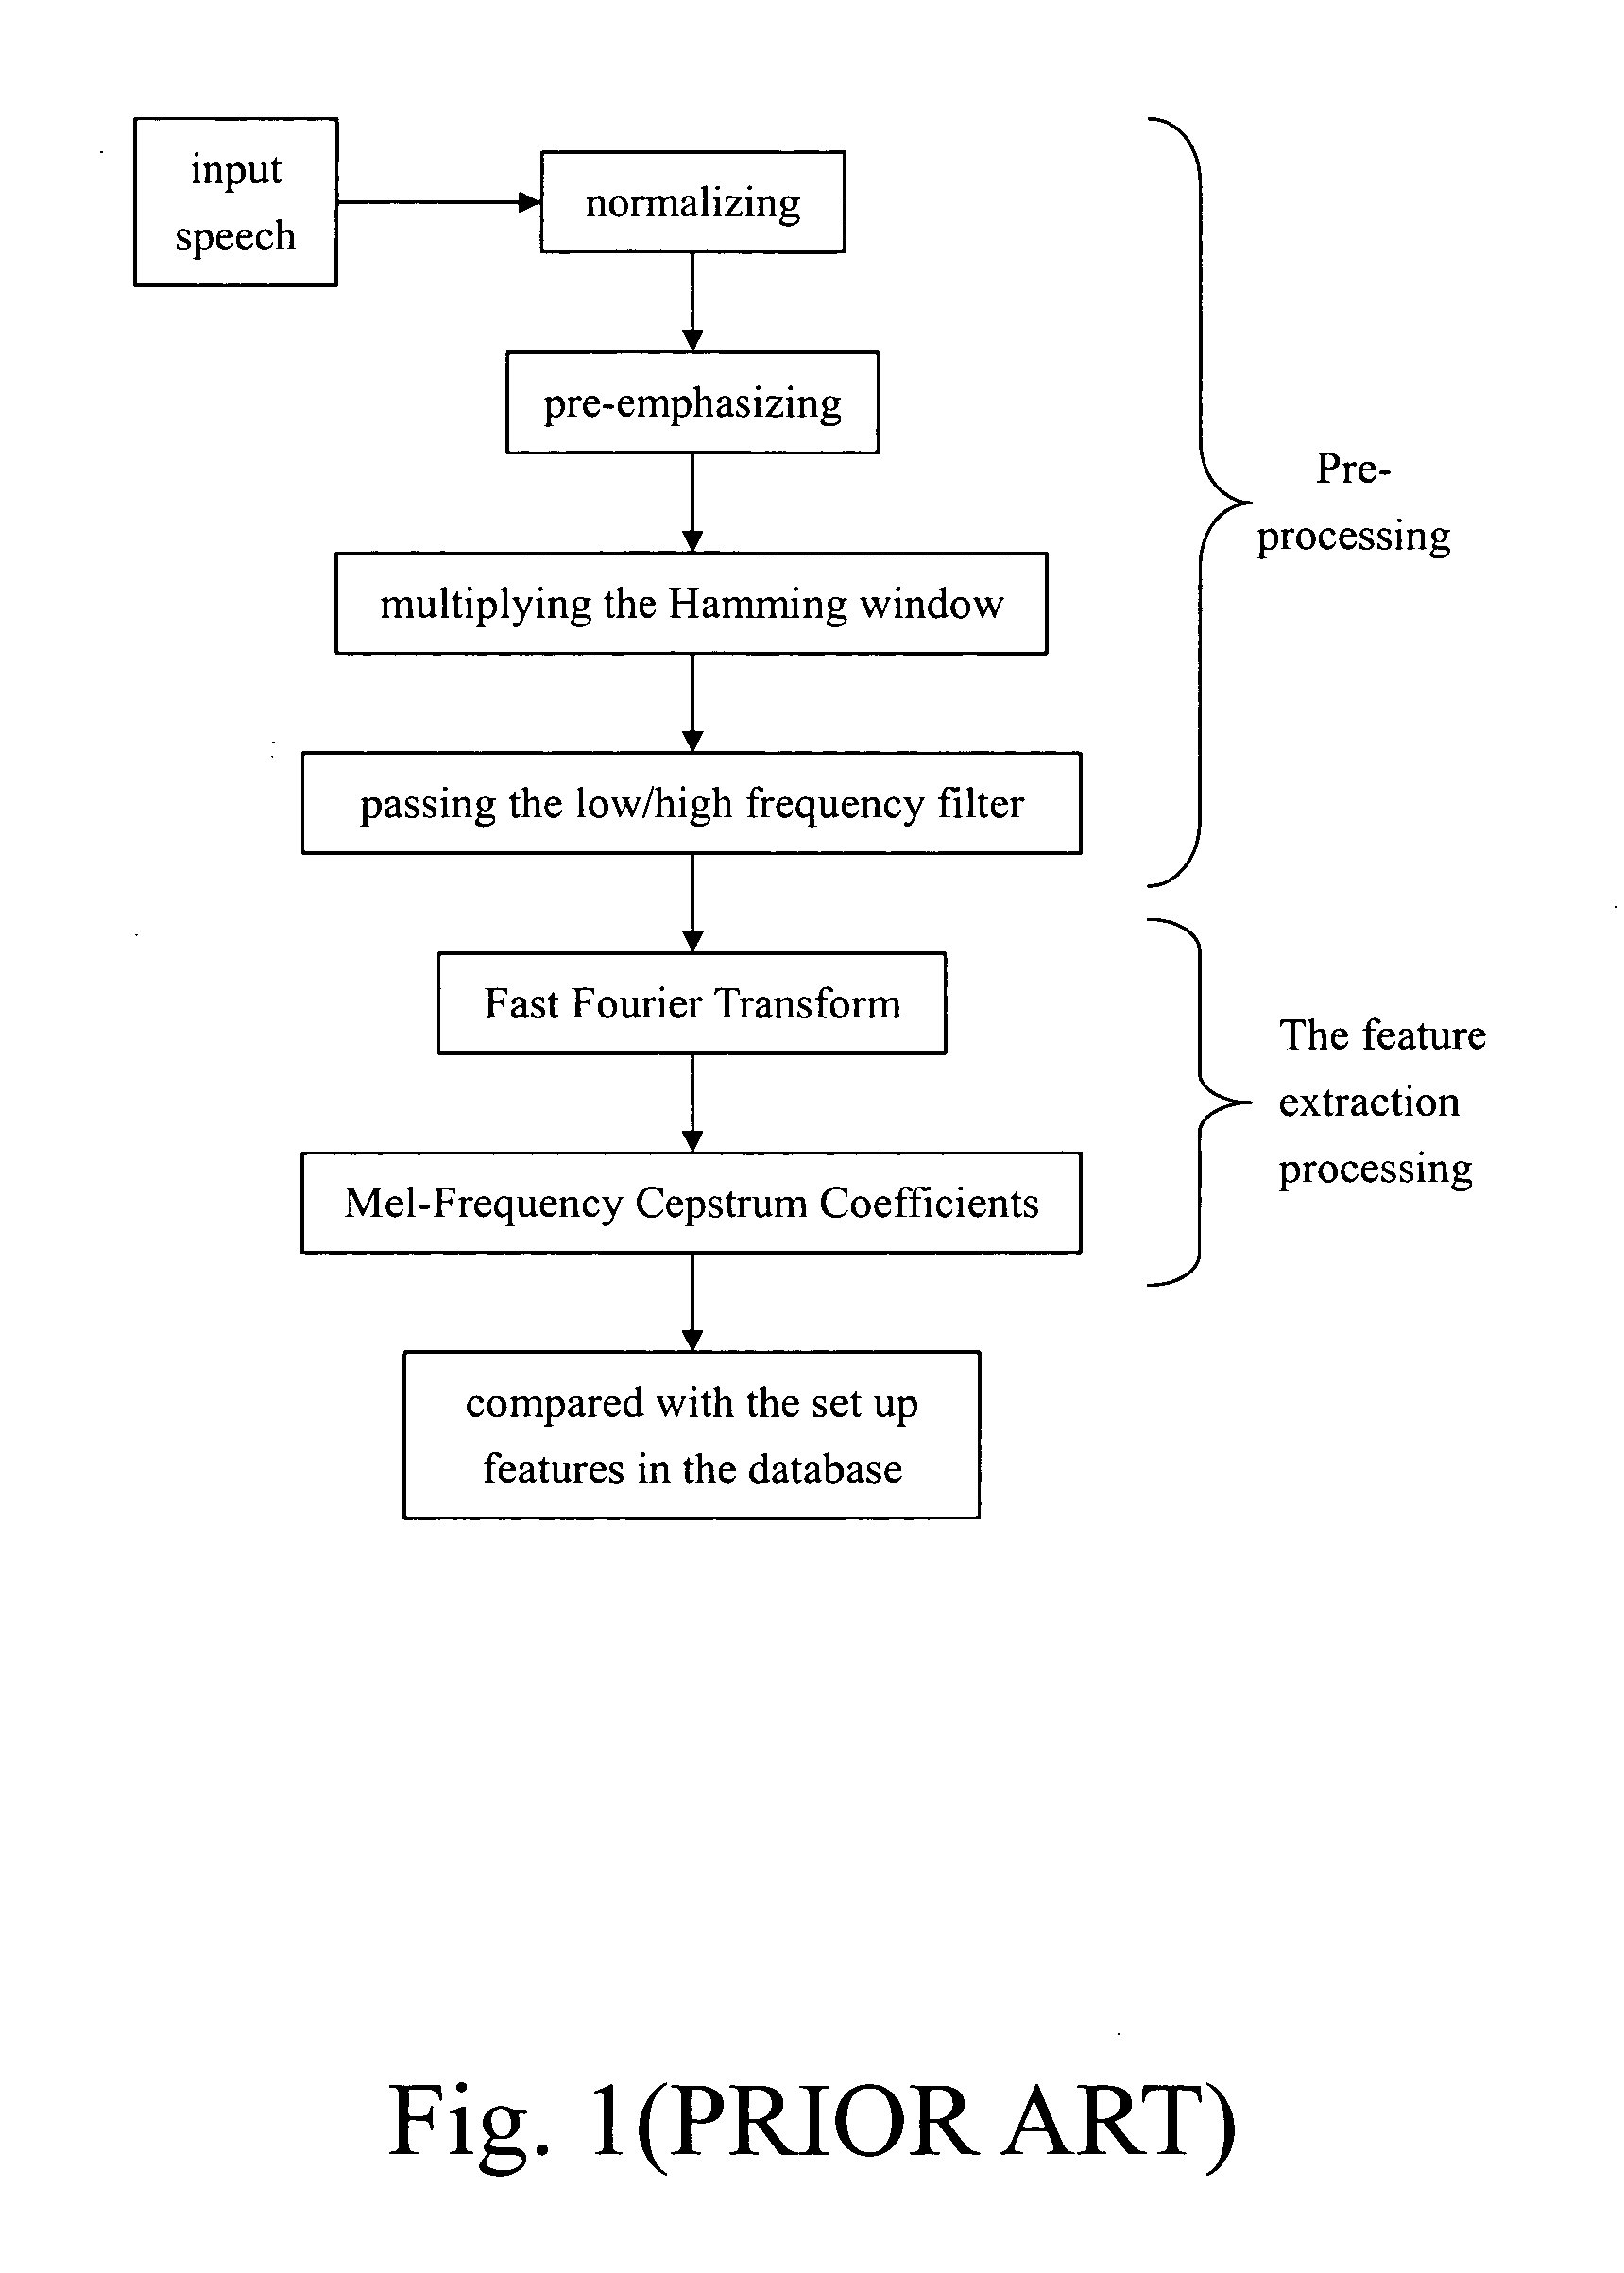 Method for optimizing loads of speech/user recognition system